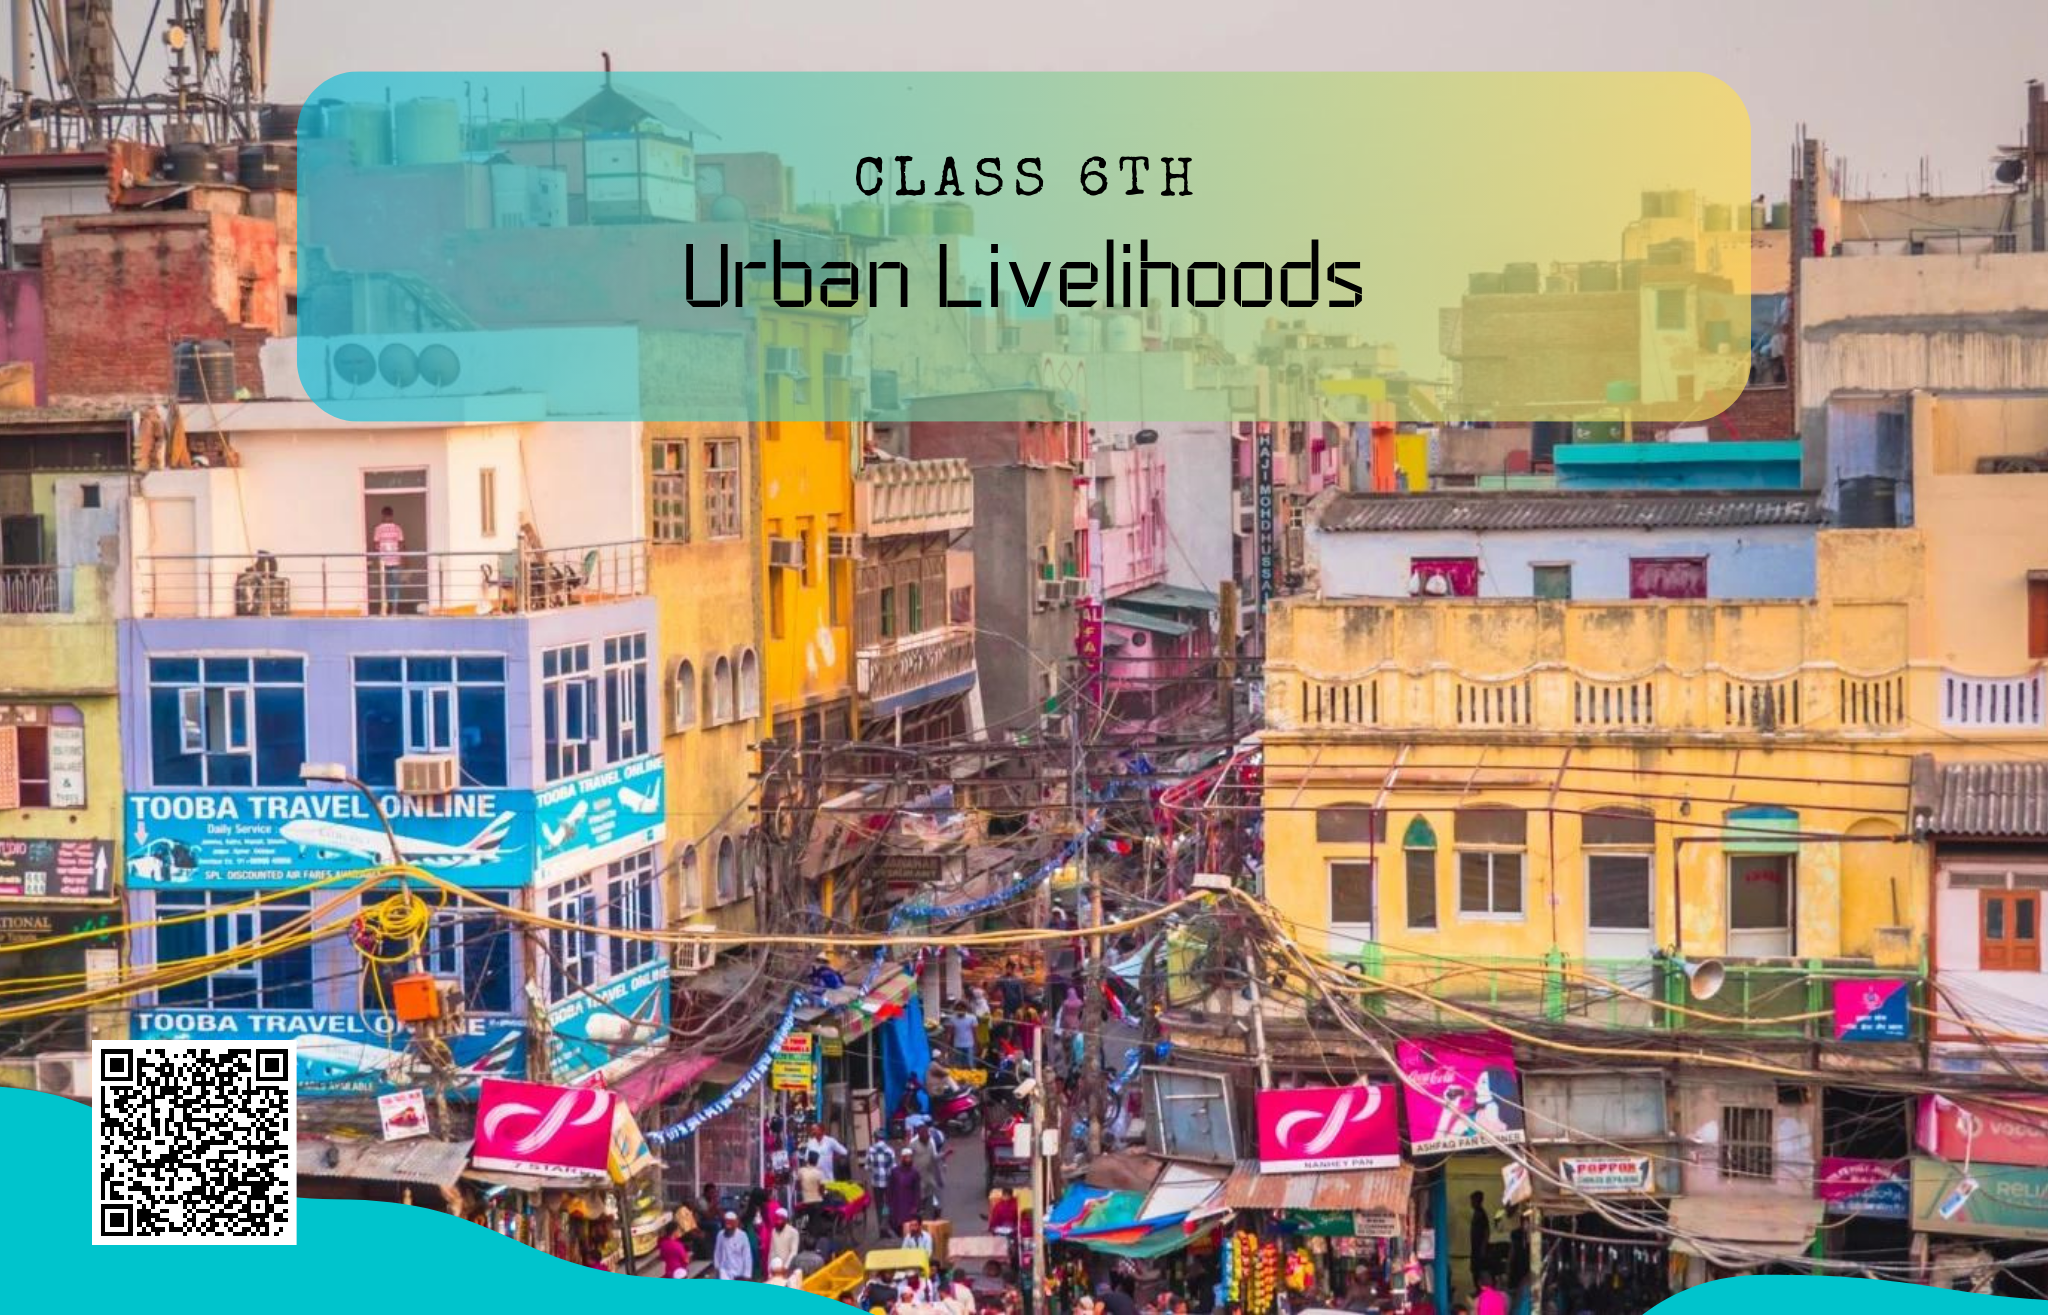 People in urban areas are either self-employed or work for someone. They earn their living in various ways. It is also seen that various people travel from rural to urban areas in search of work and a better life.